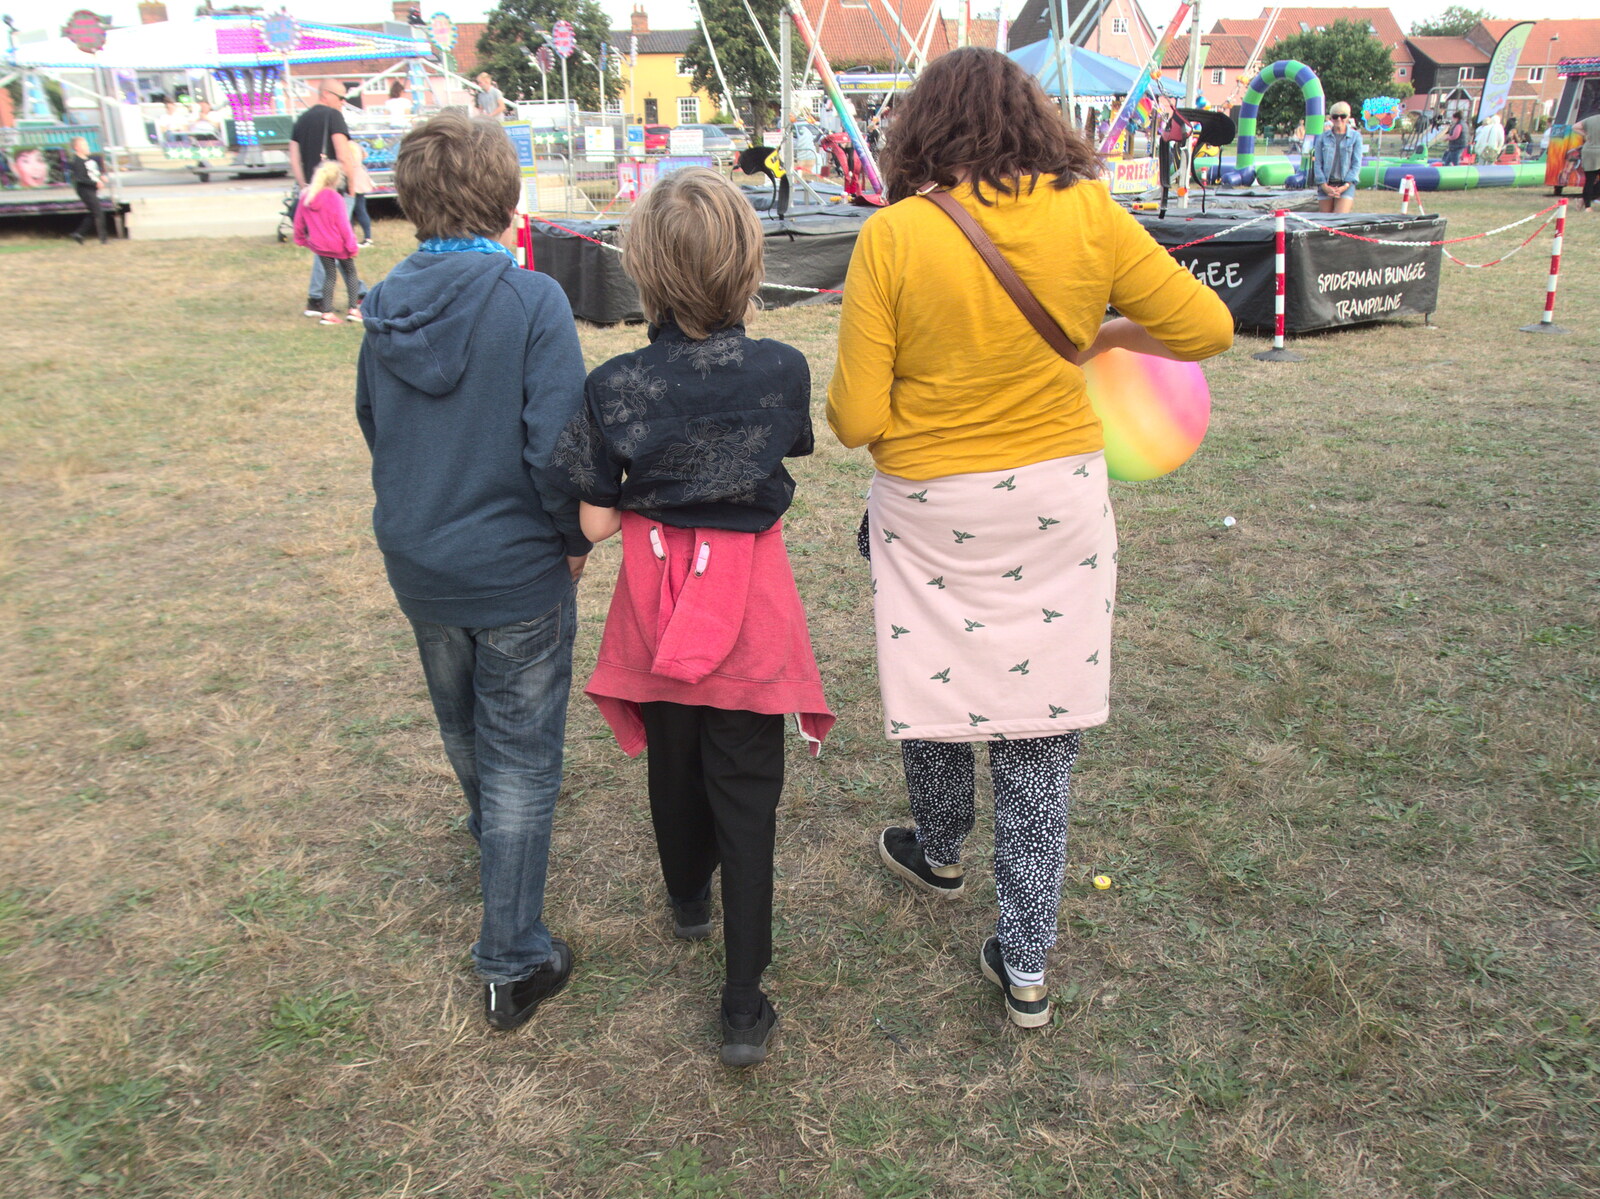 Fred, Harry and Isobel head off from A Few Hours at the Fair, Fair Green, Diss, Norfolk - 5th September 2021